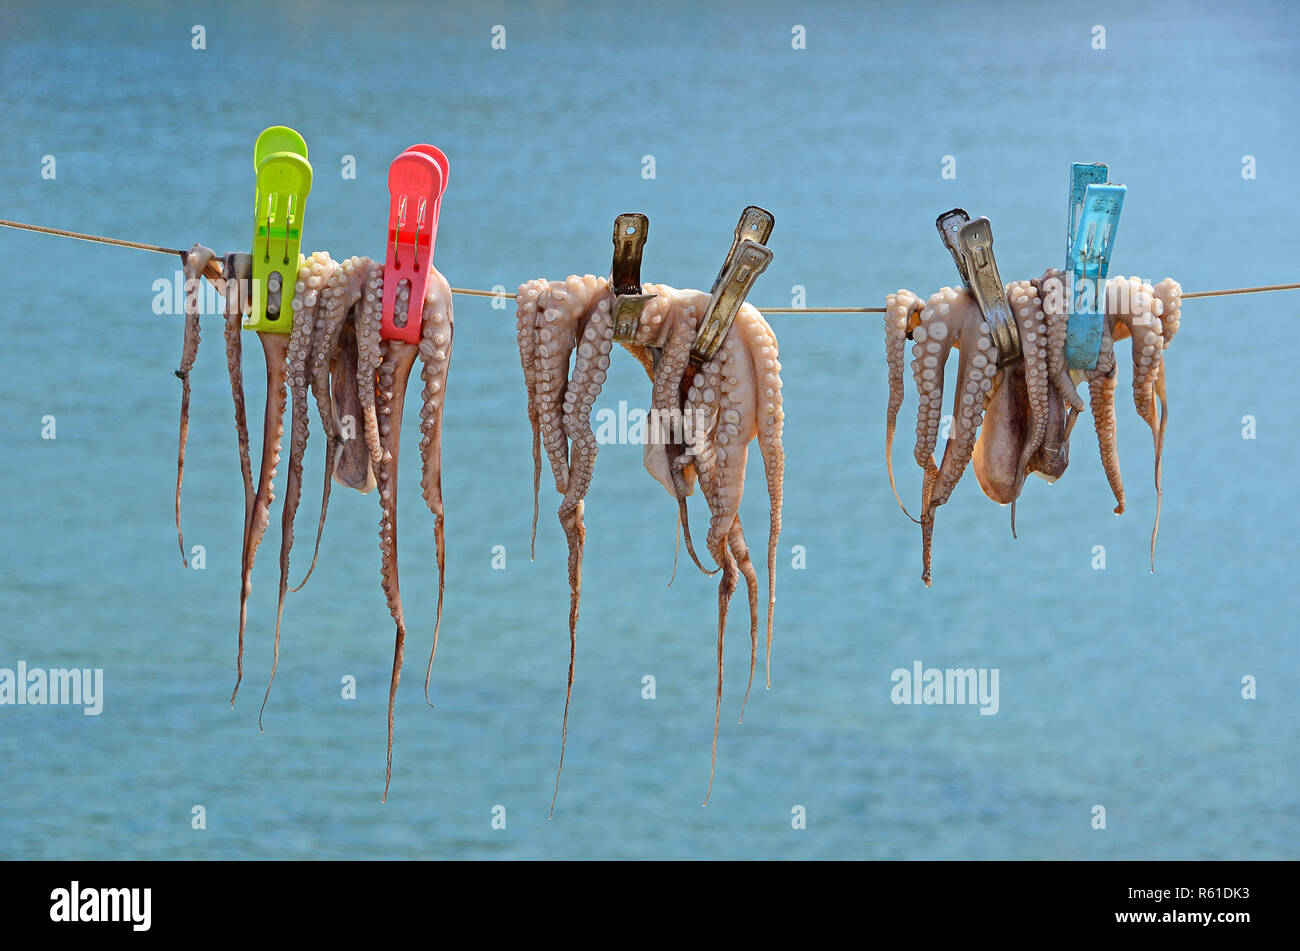 cuttlefish are hanging on a leash Stock Photo